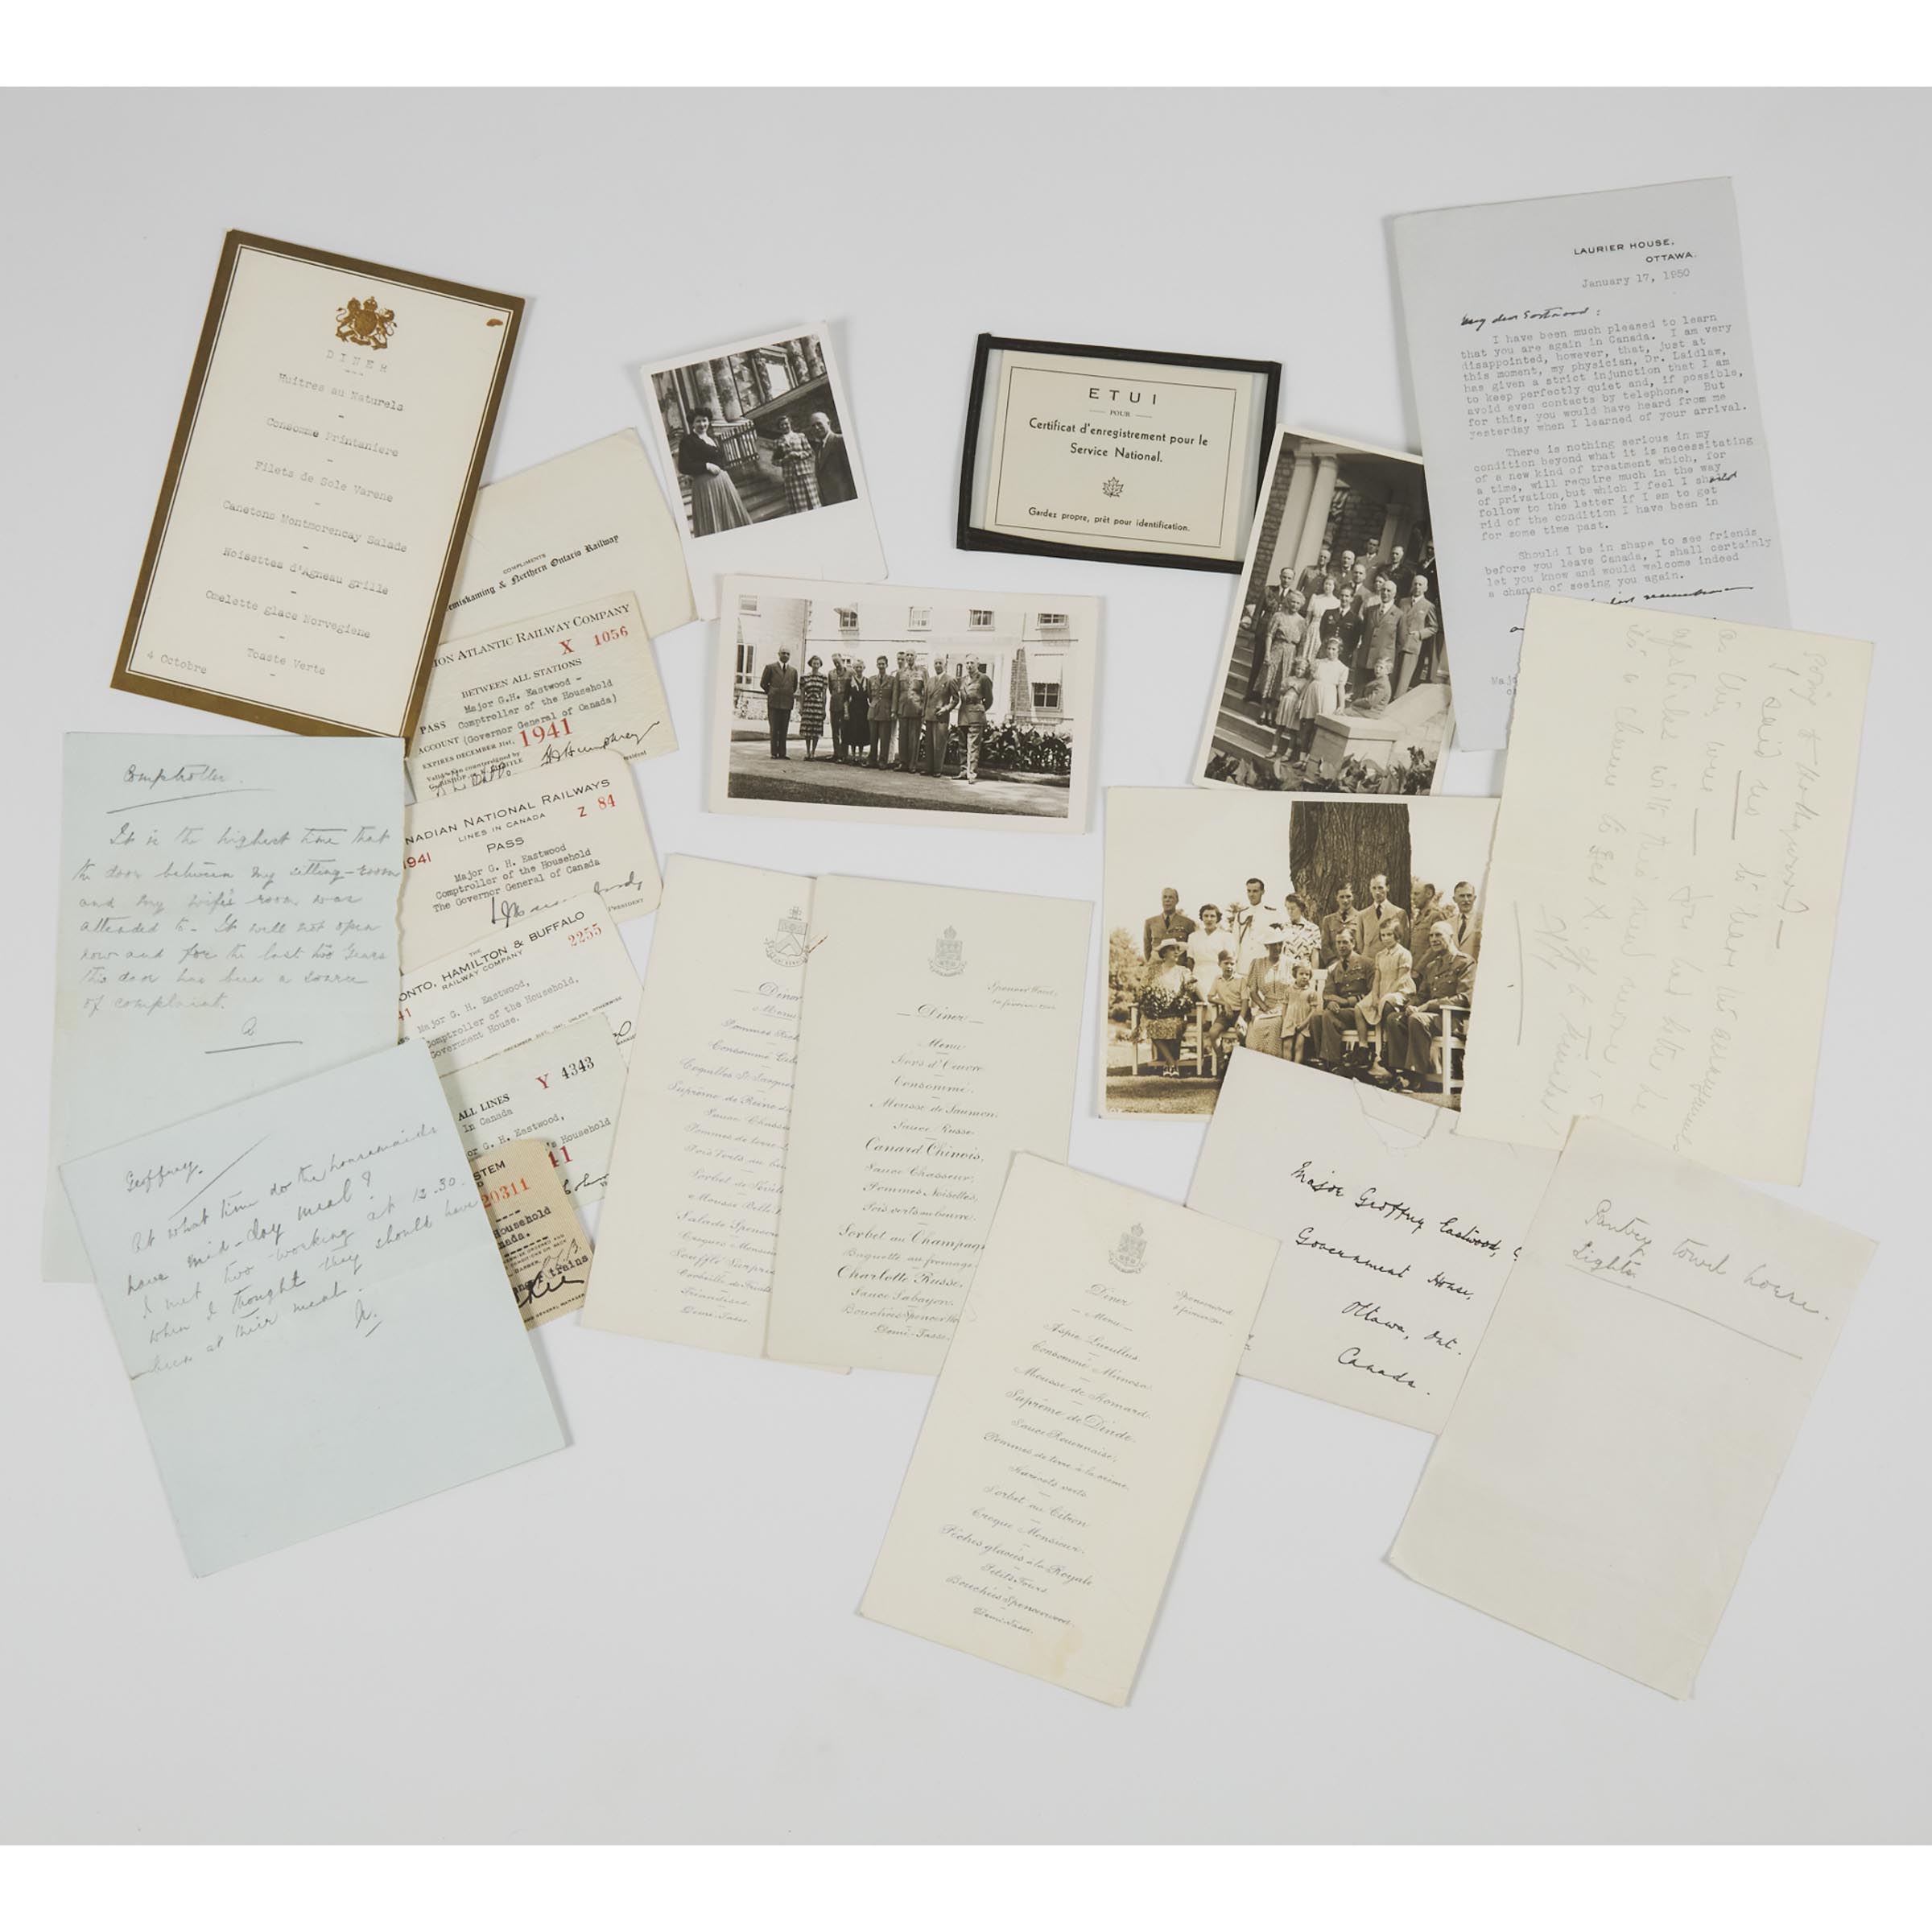 Archive of Correspondence and Photographs Relating to Major Geoffrey H. Eastwood, Comptroller of the Household for Government House (Rideau Hall), 1941-1950